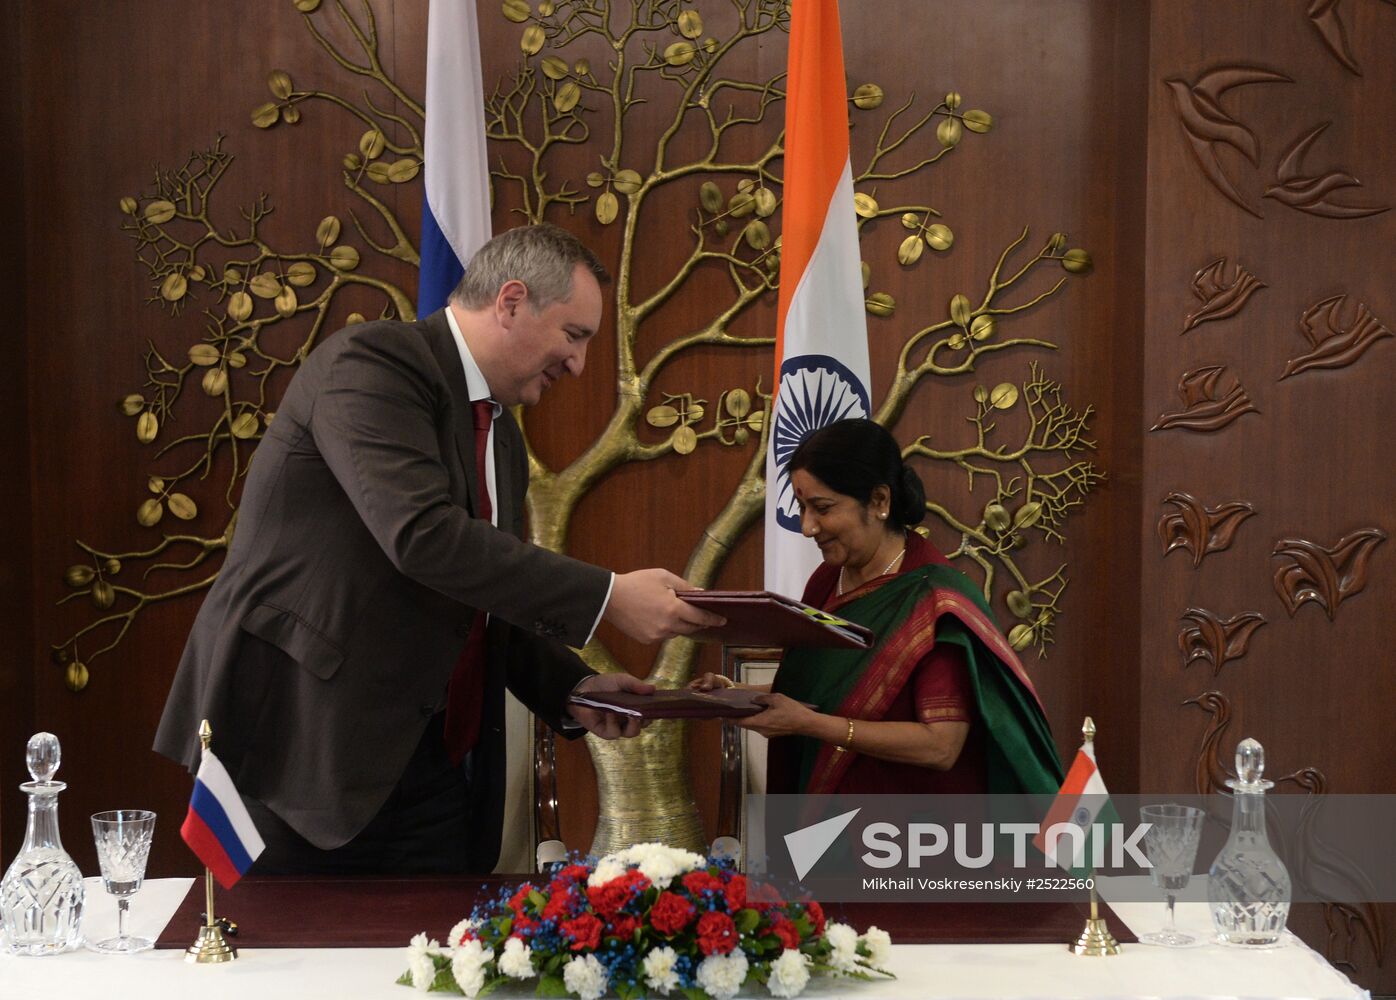 Meeting of Russian-Indian Intergovernmental Commission in New Delhi